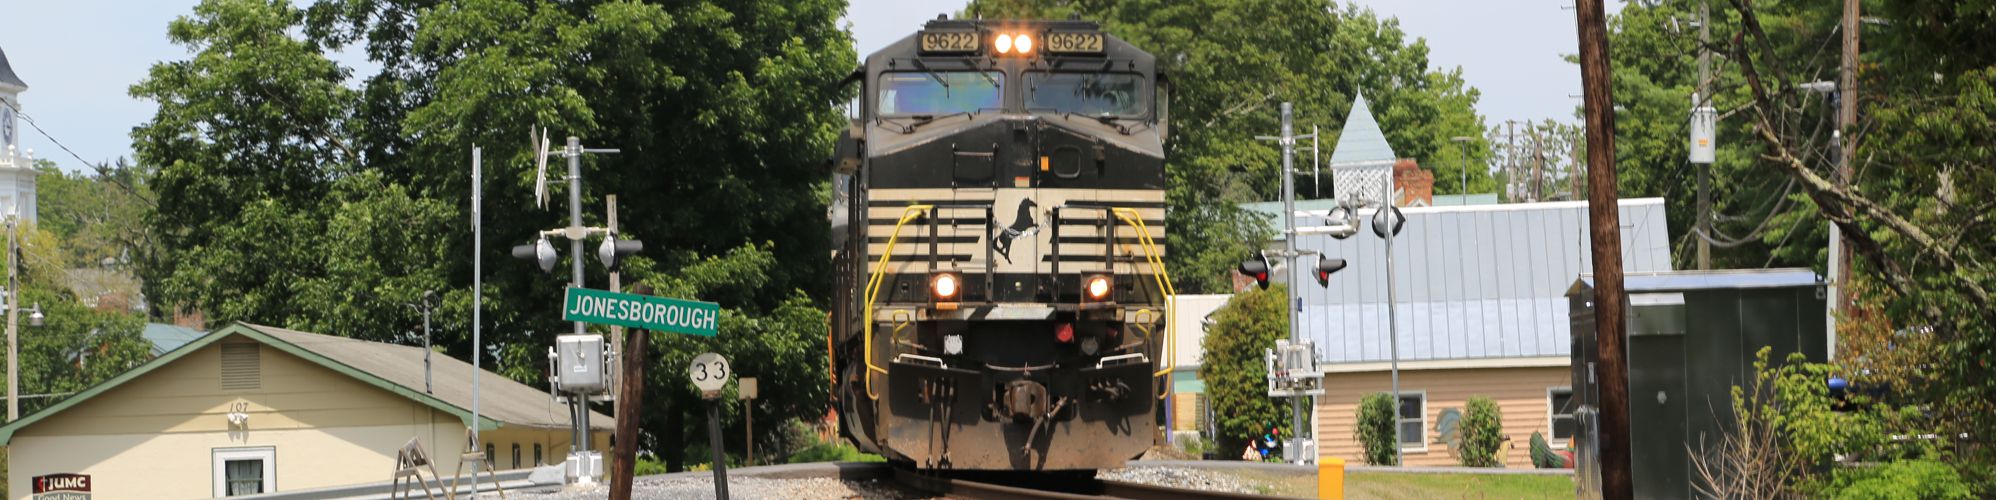 Picture of Norfolk Southern's lead train engine in Jonesborough